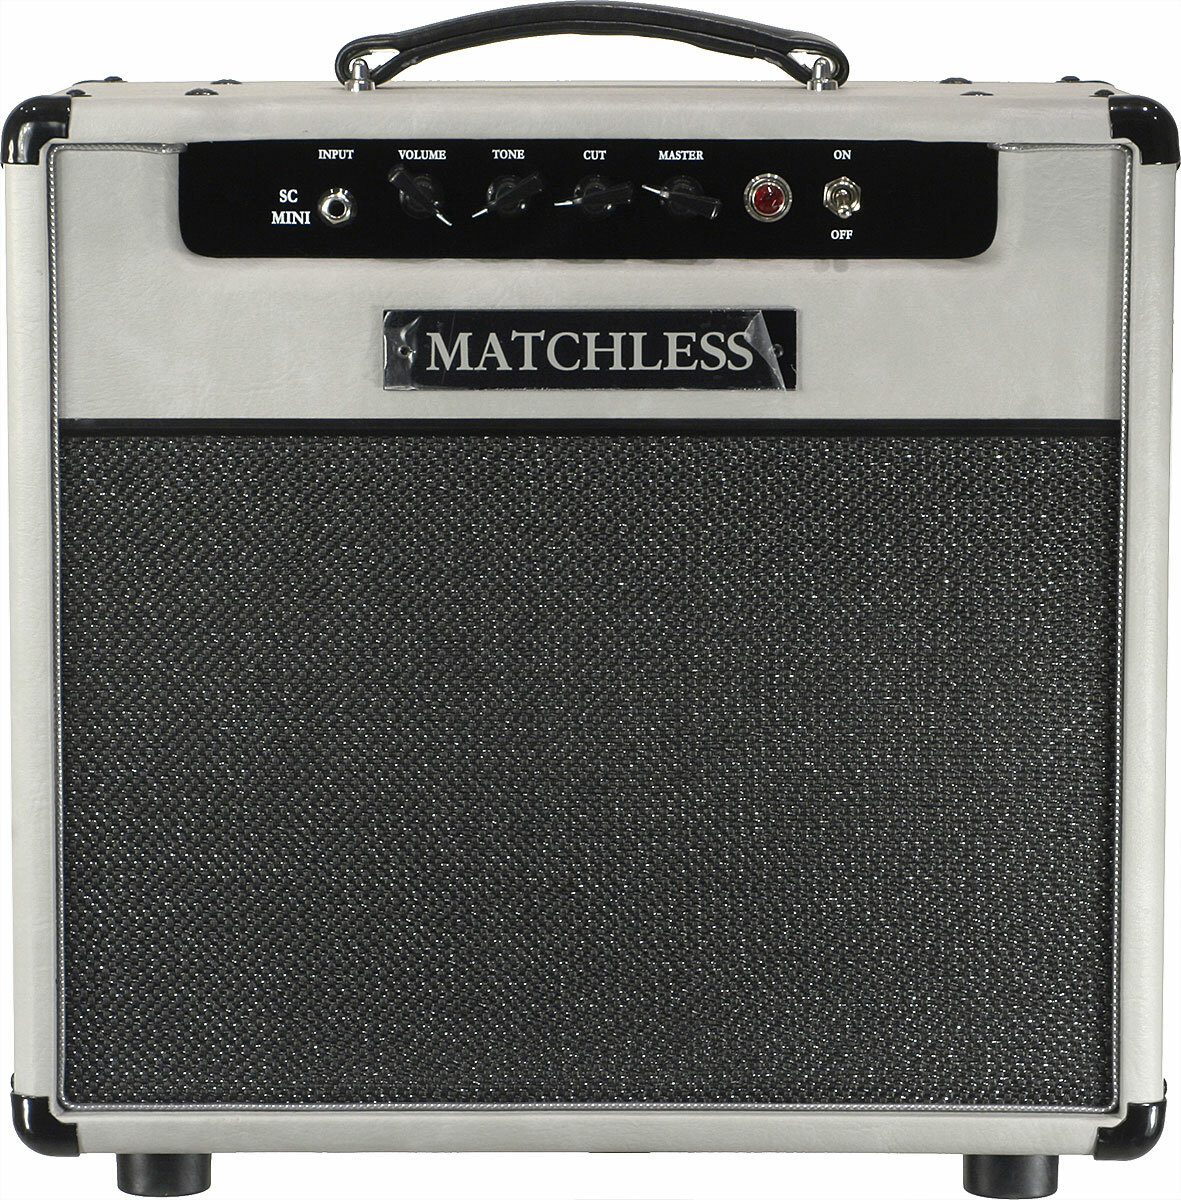 Matchless Sc Mini 1x12 6w Gray/silver - Electric guitar combo amp - Main picture